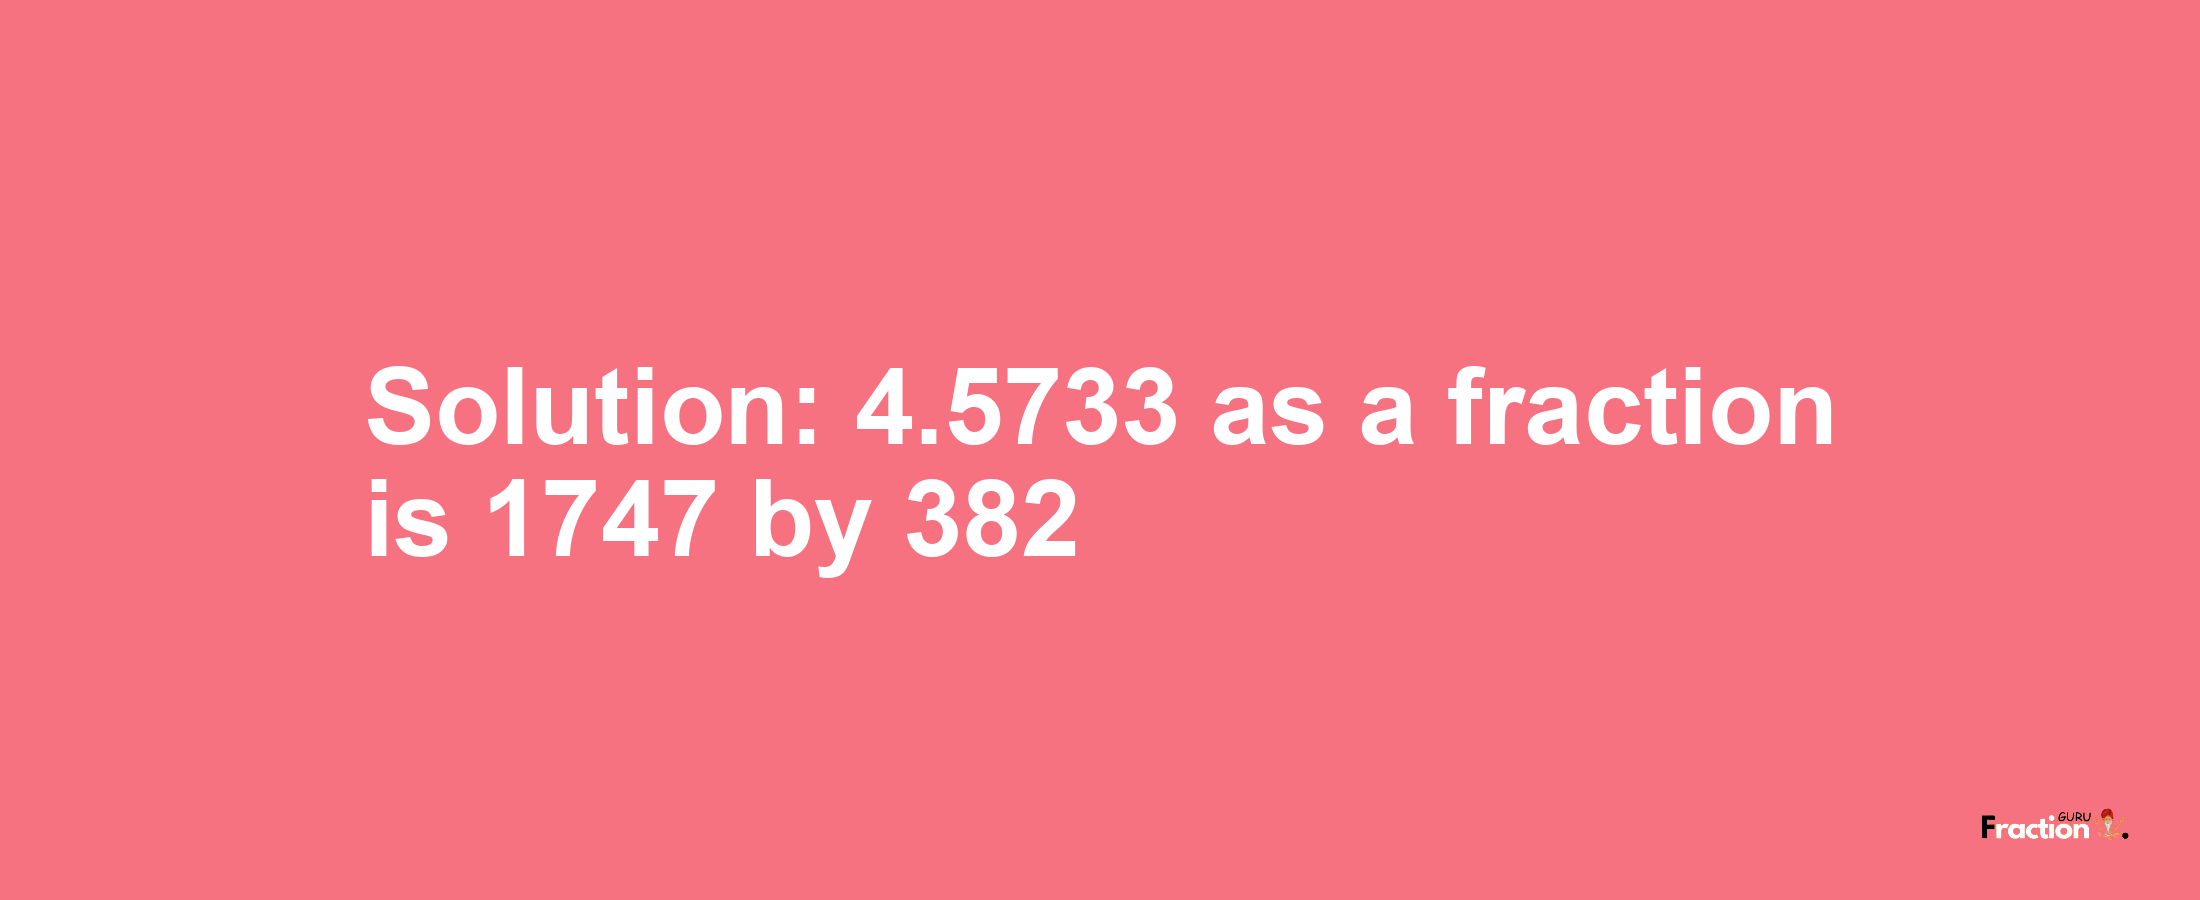 Solution:4.5733 as a fraction is 1747/382